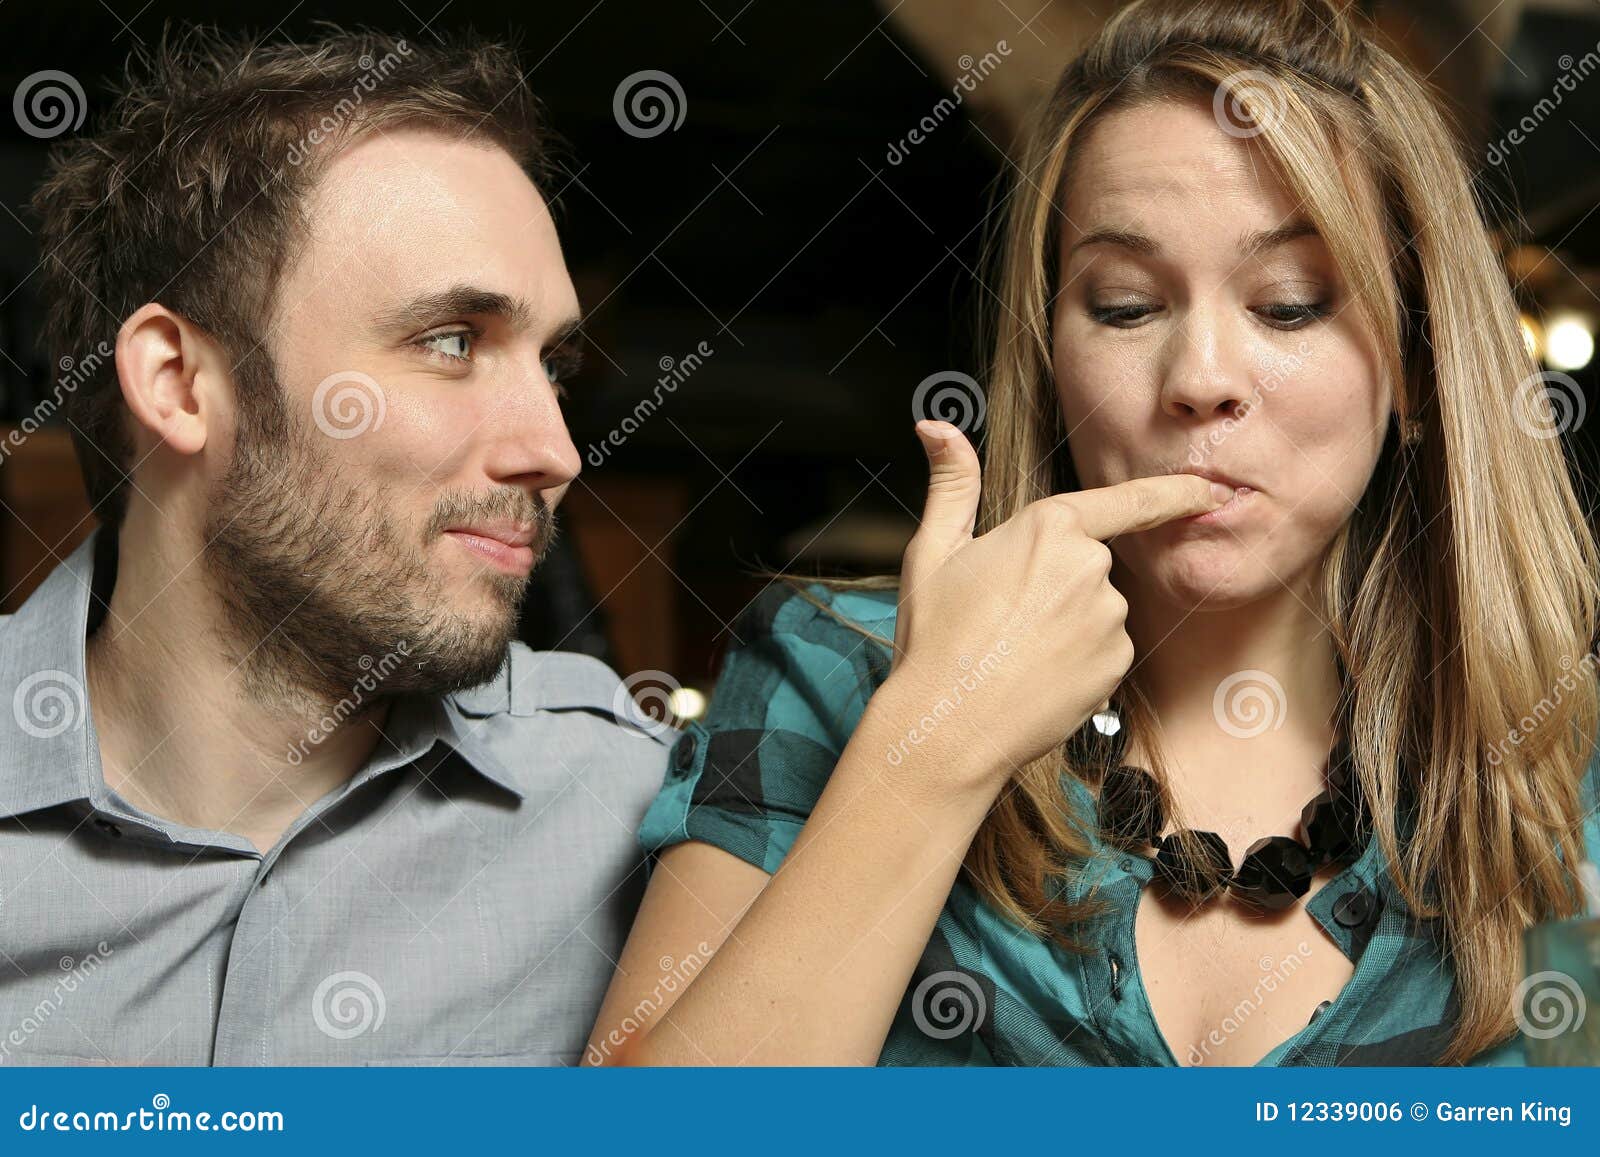 209 Woman Licking Fingers Stock Photos